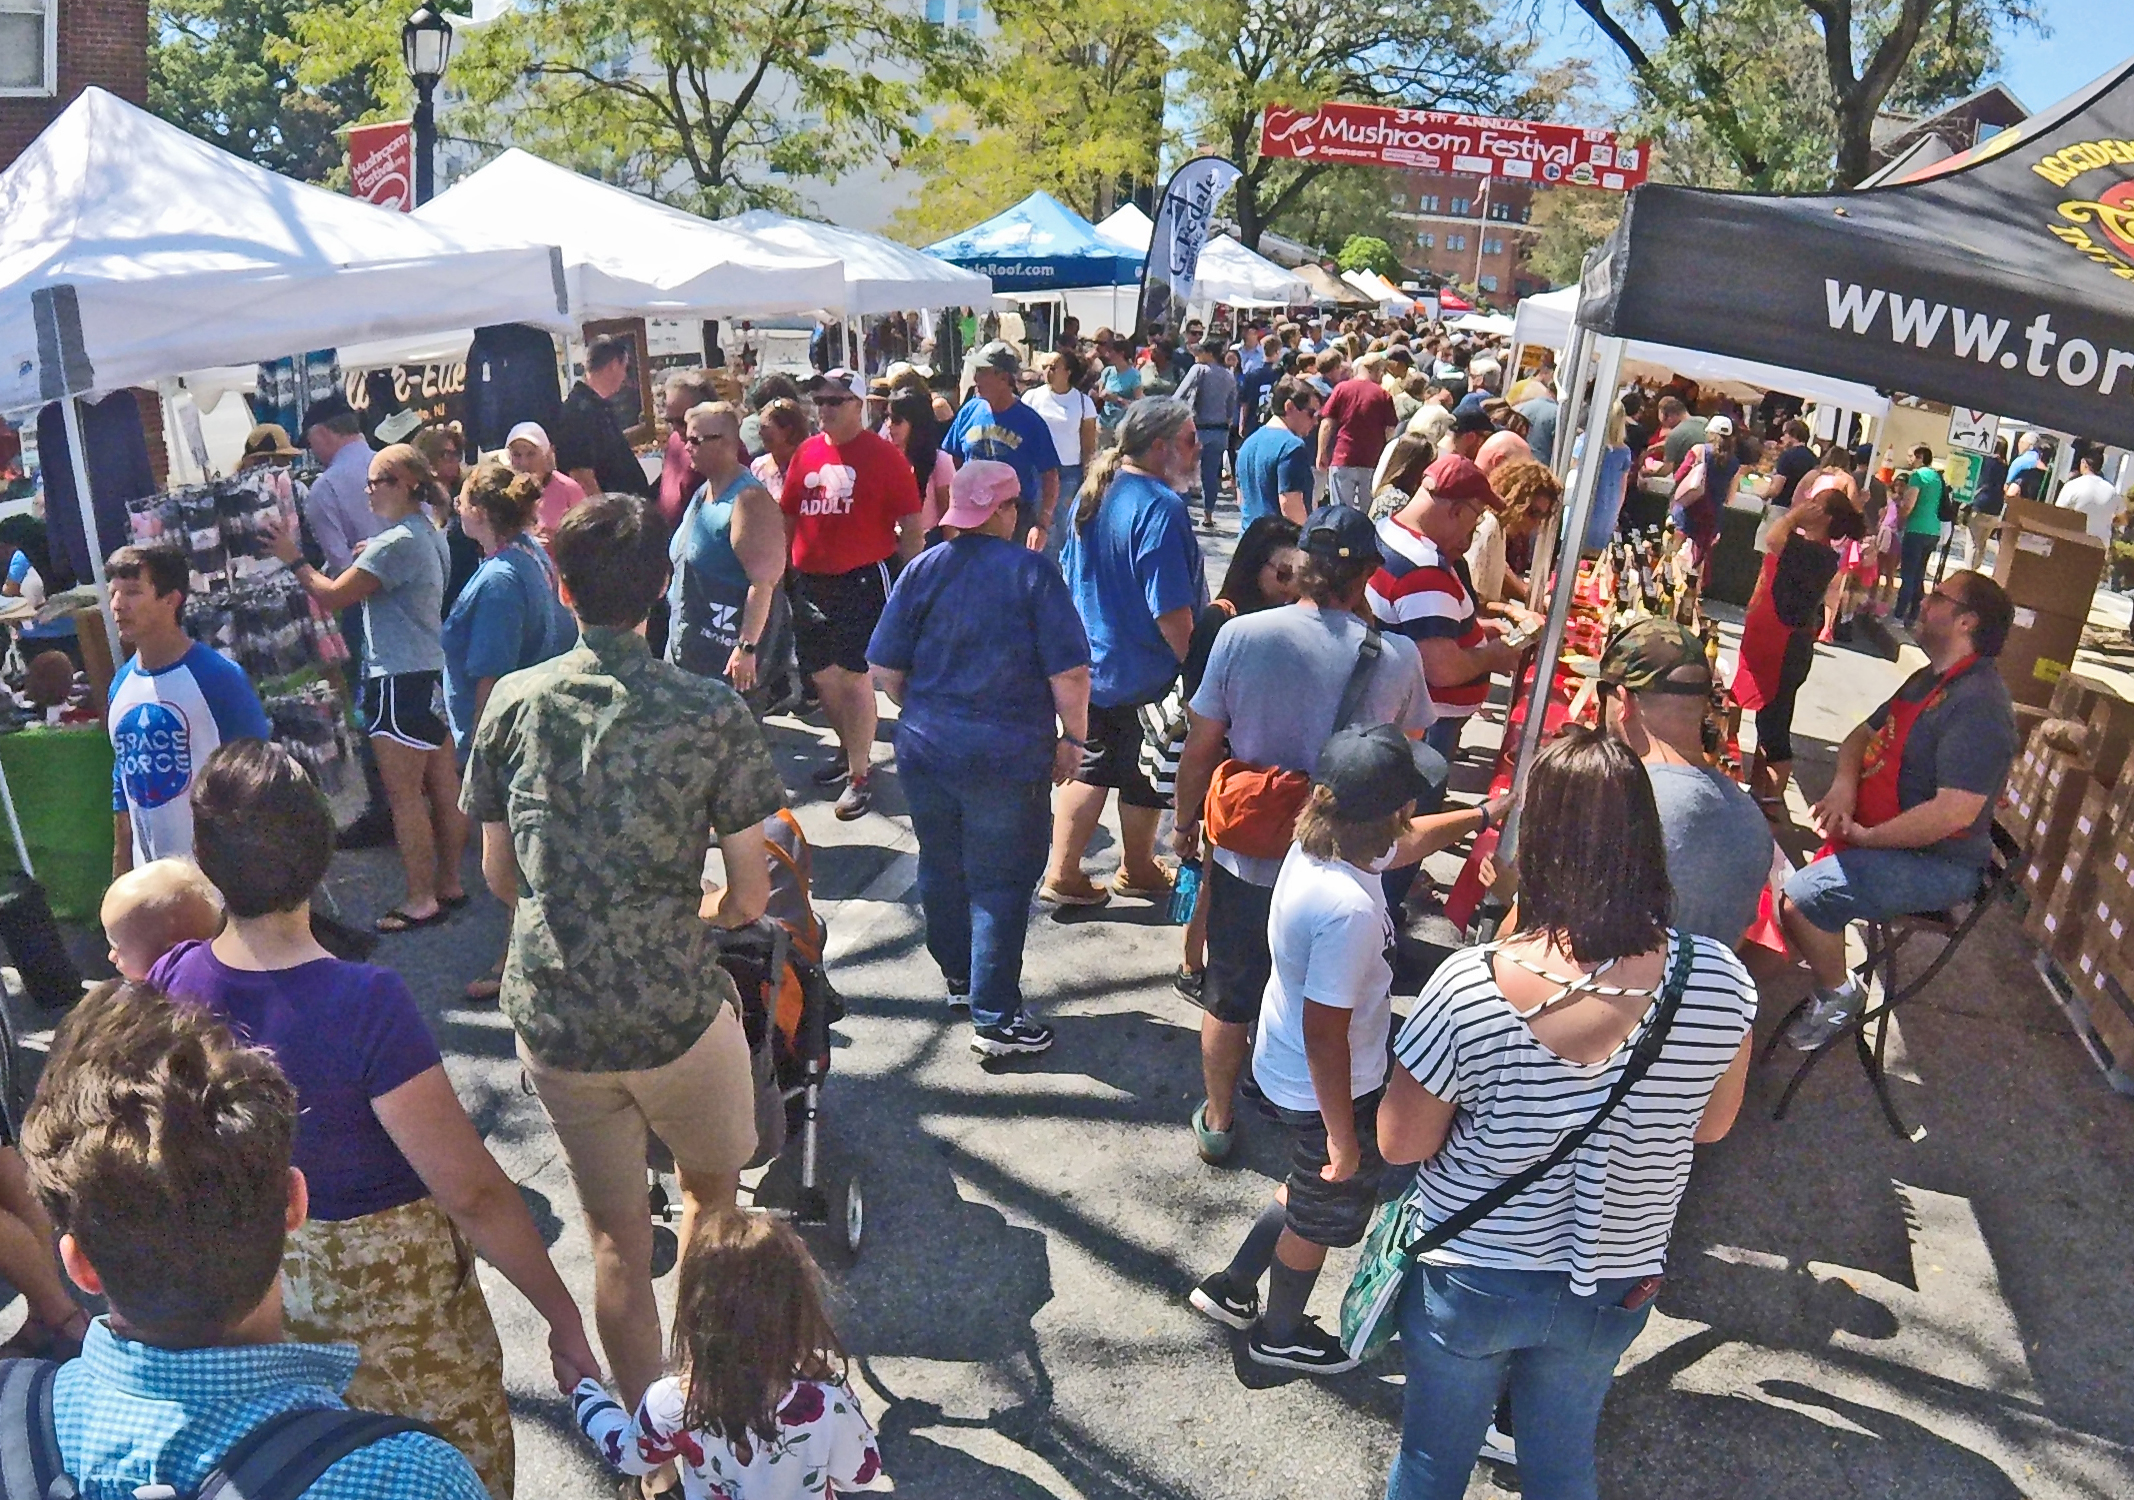 Thousands show up for the Mushroom Festival Chester County Press